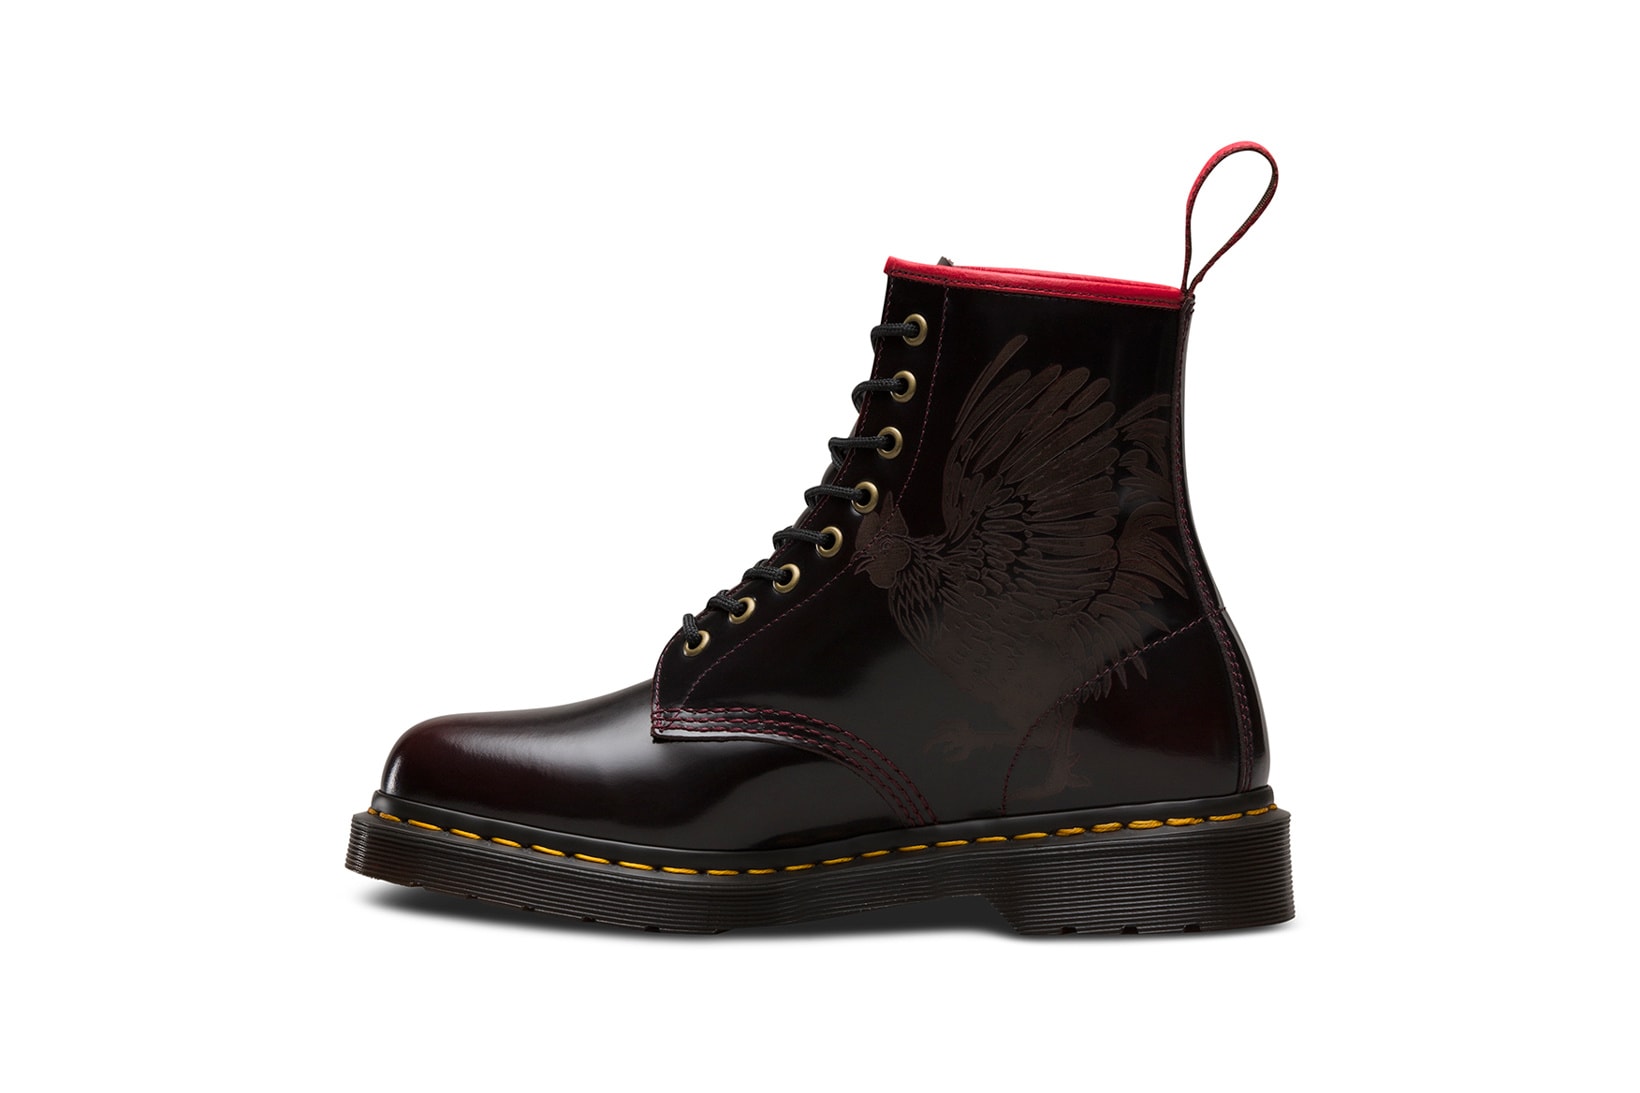 Dr. Martens "Year of the Rooster" 1460 Boot